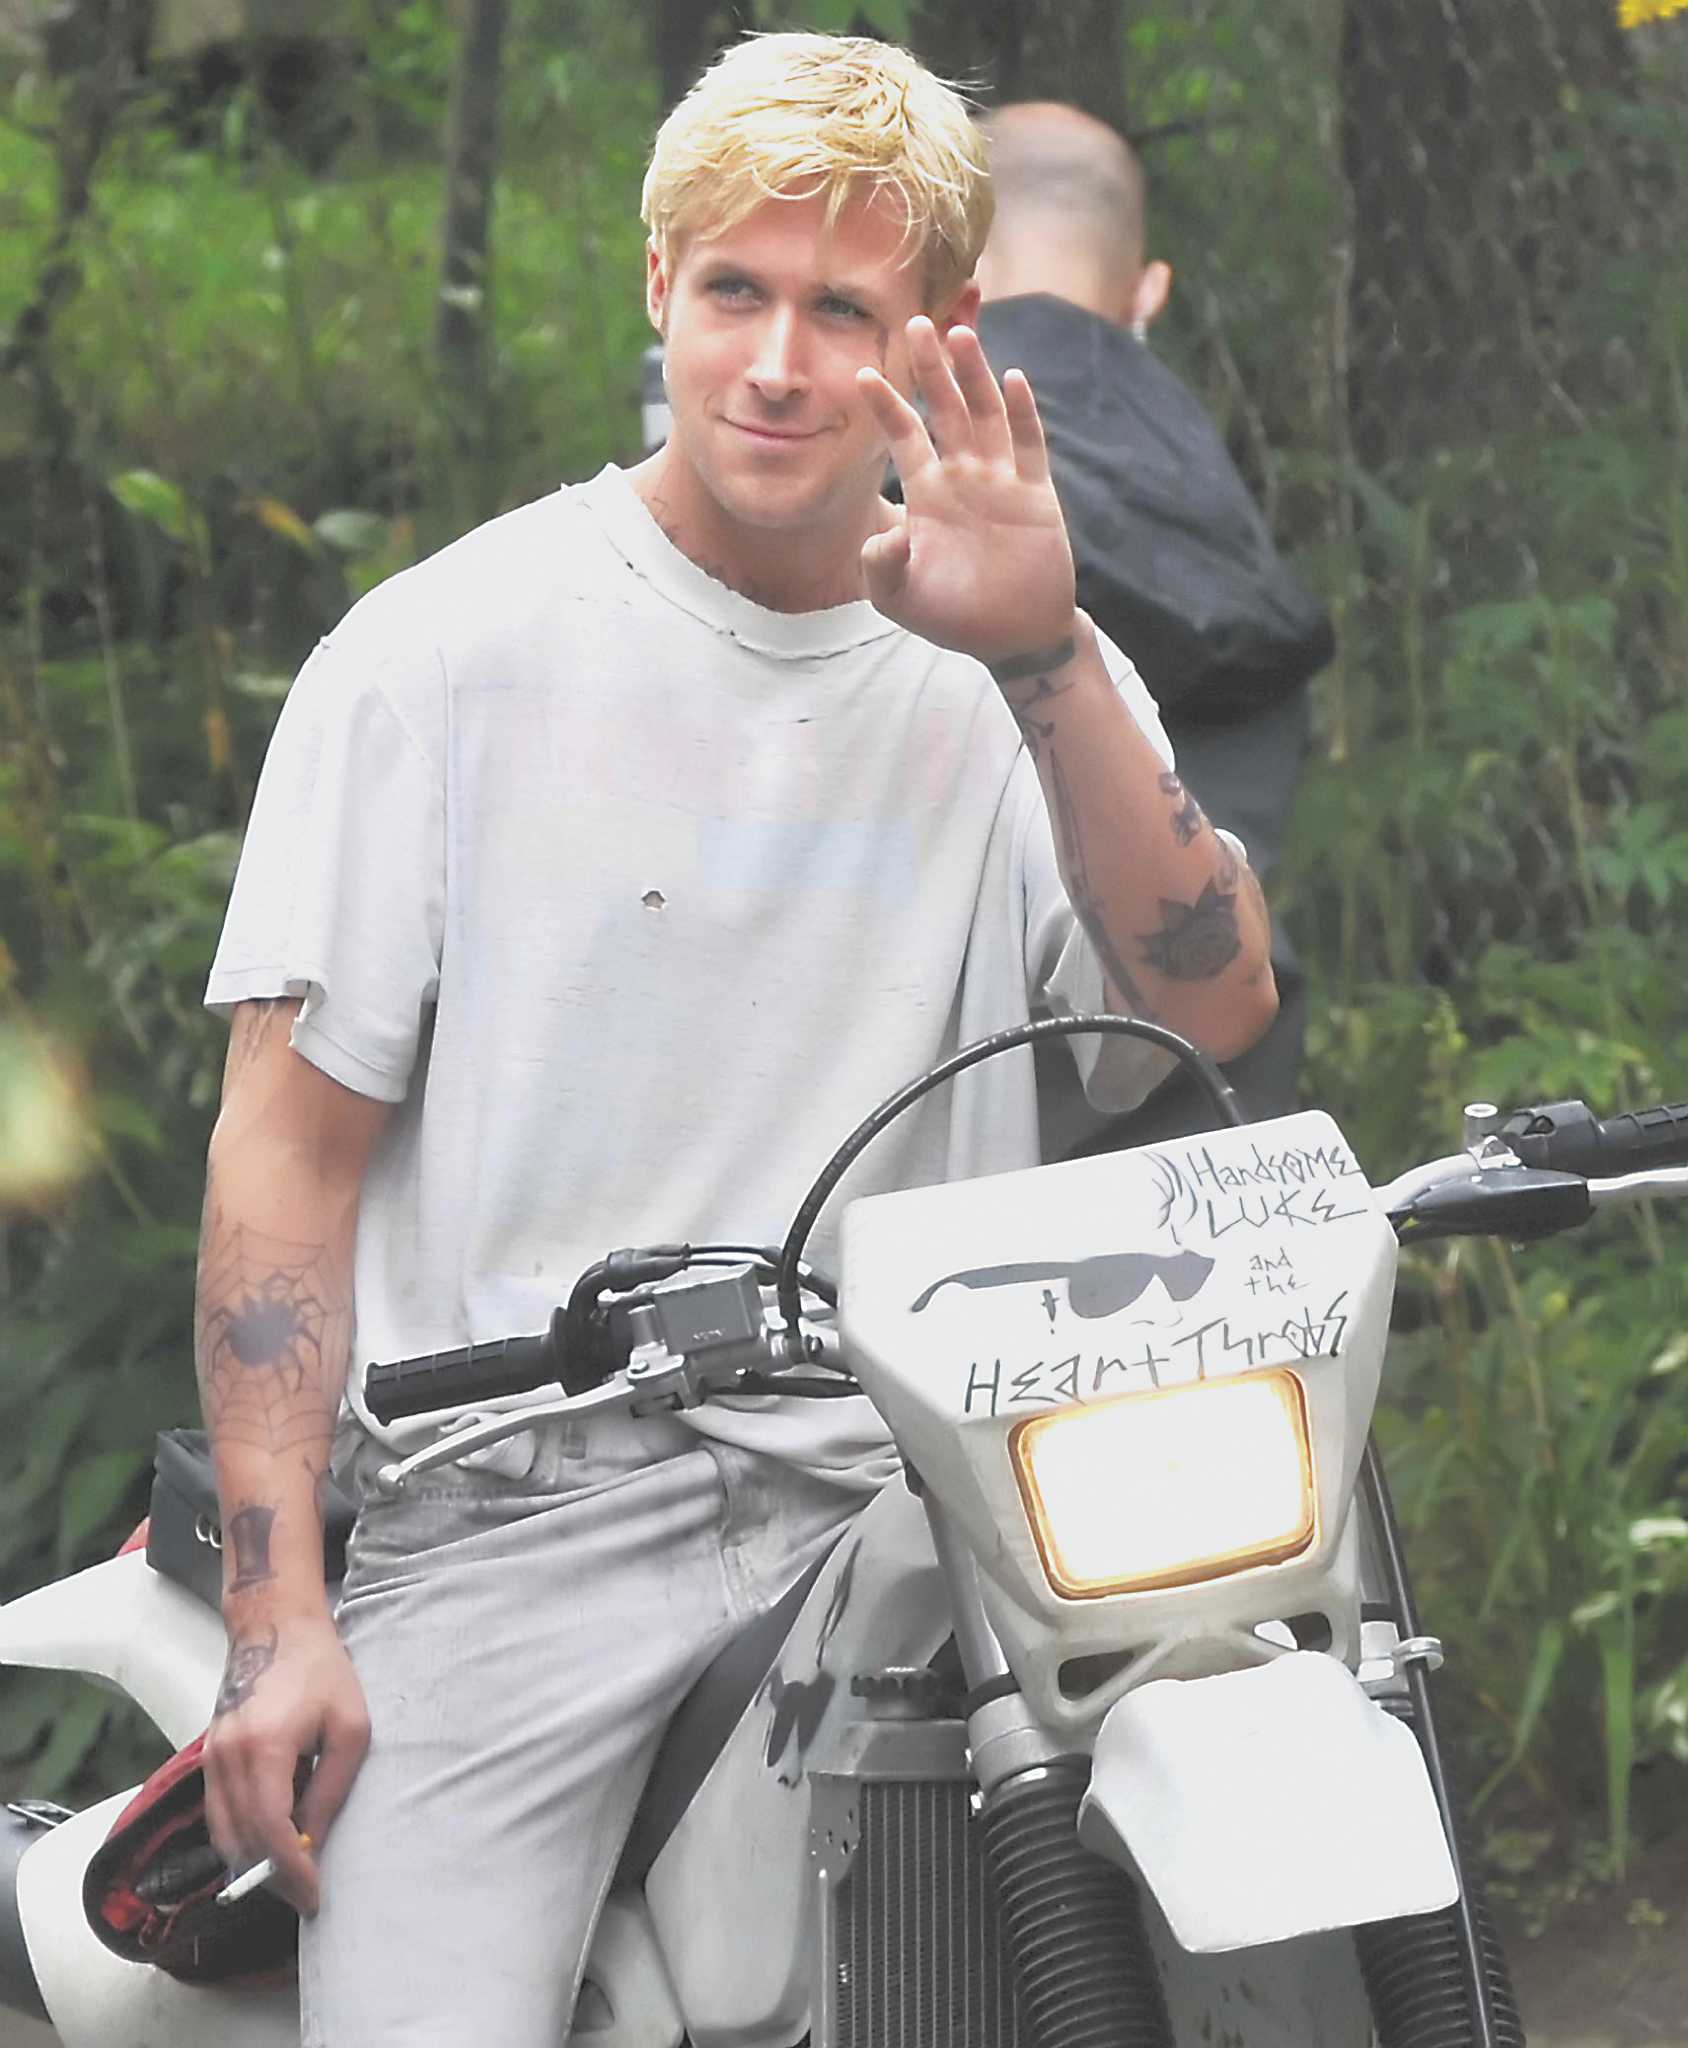 Venice Film Festival Hoping To Preview Place Beyond The Pines